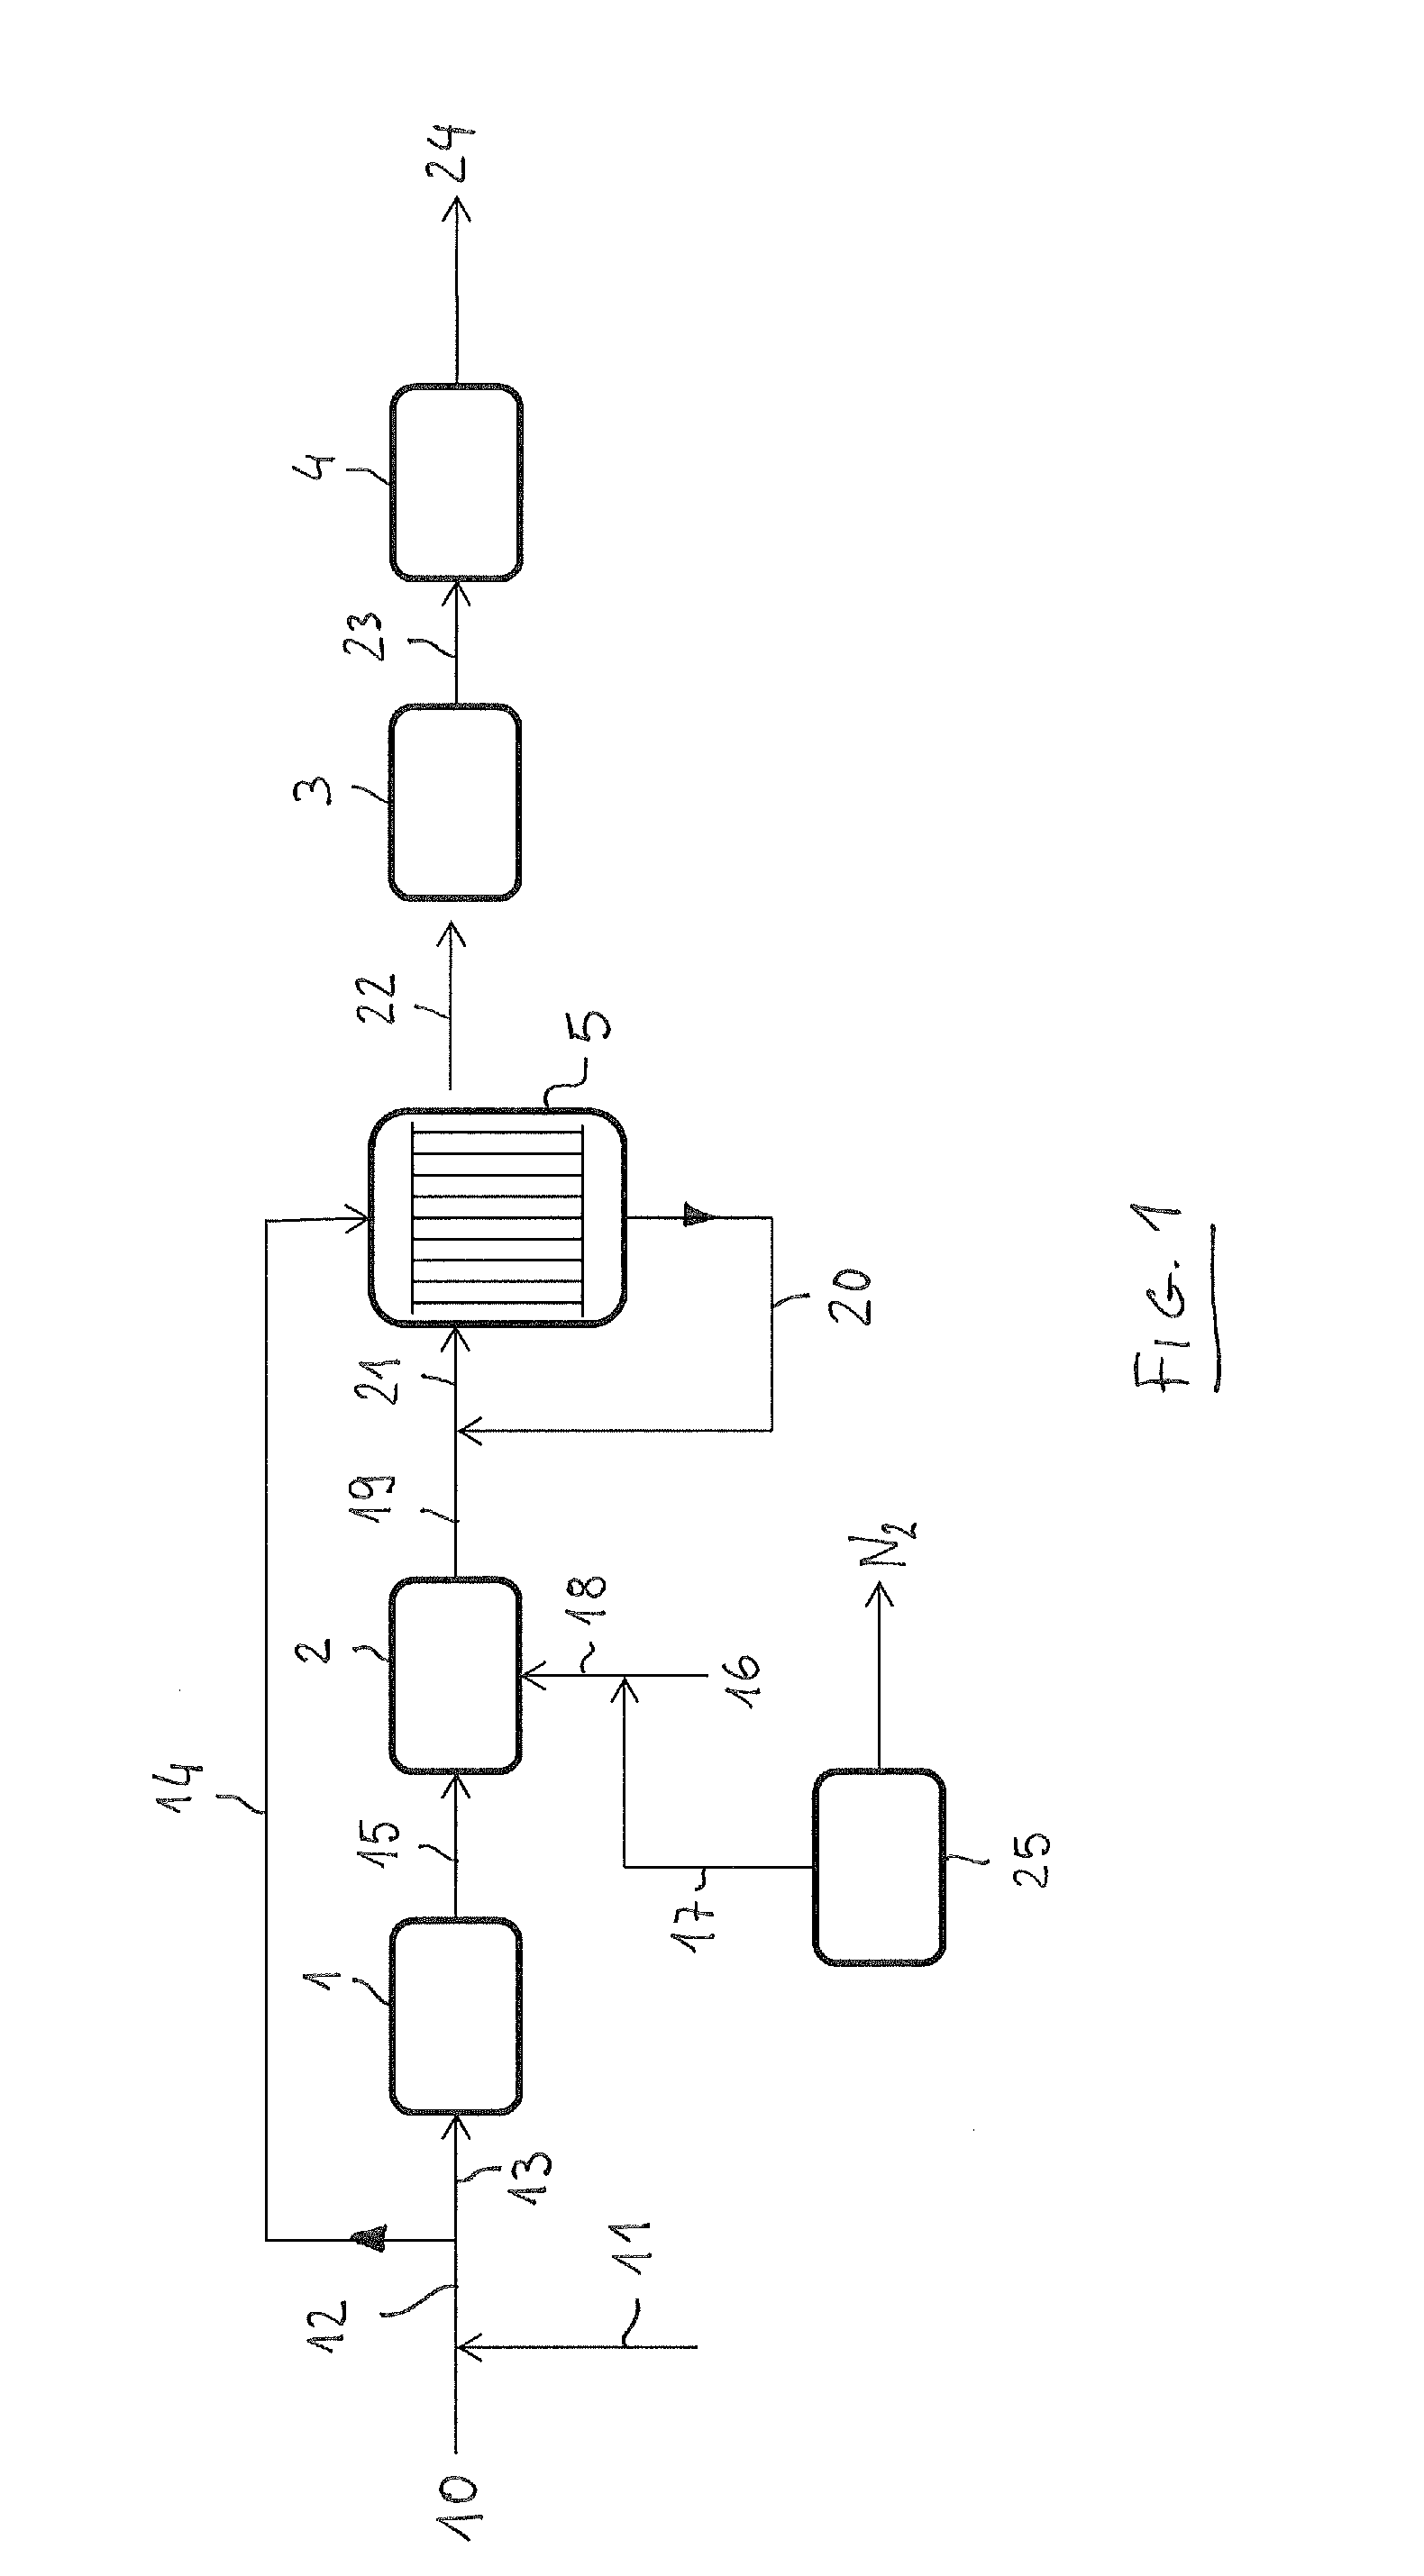 Process for producing ammonia synthesis gas and a method for revamping a front-end of an ammonia plant